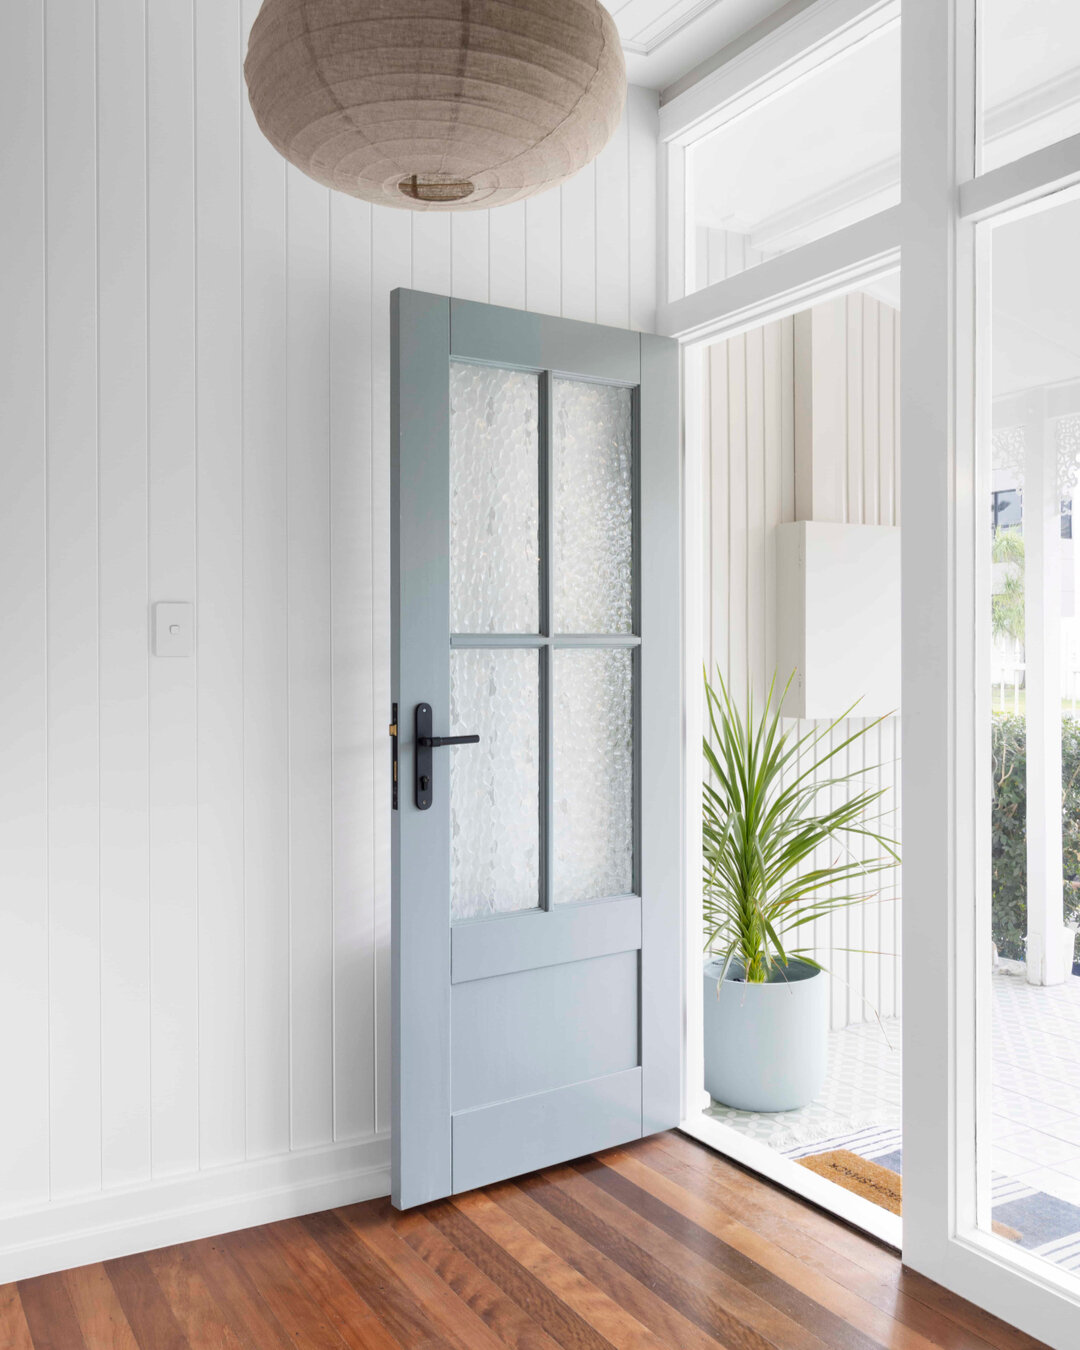 Say hello in style with a dusky blue front door! Inspired by ocean-side living, our Hamptons palette includes a family of paint colours that work together to get the look.​​​​​​​​​
Sources | intrimmouldings.com.au via Pinterest, Tamara Flanagan via t